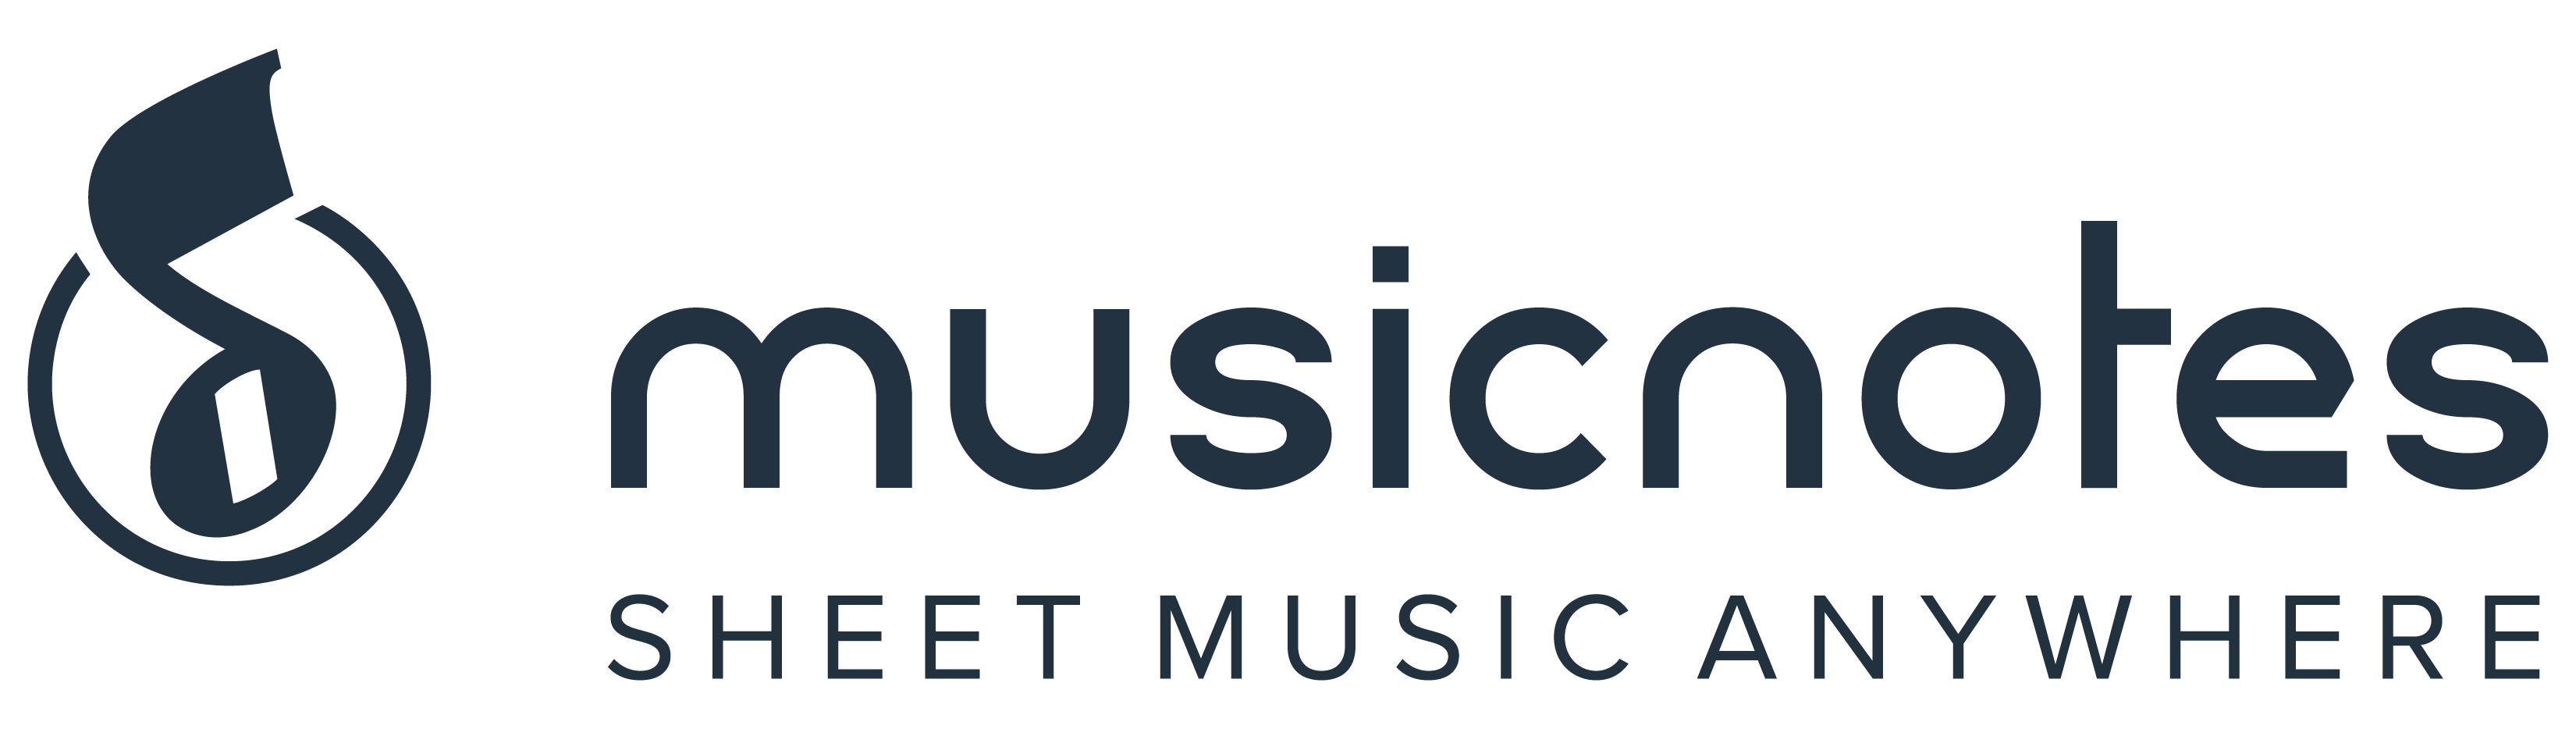 Musicnotes Coupon 